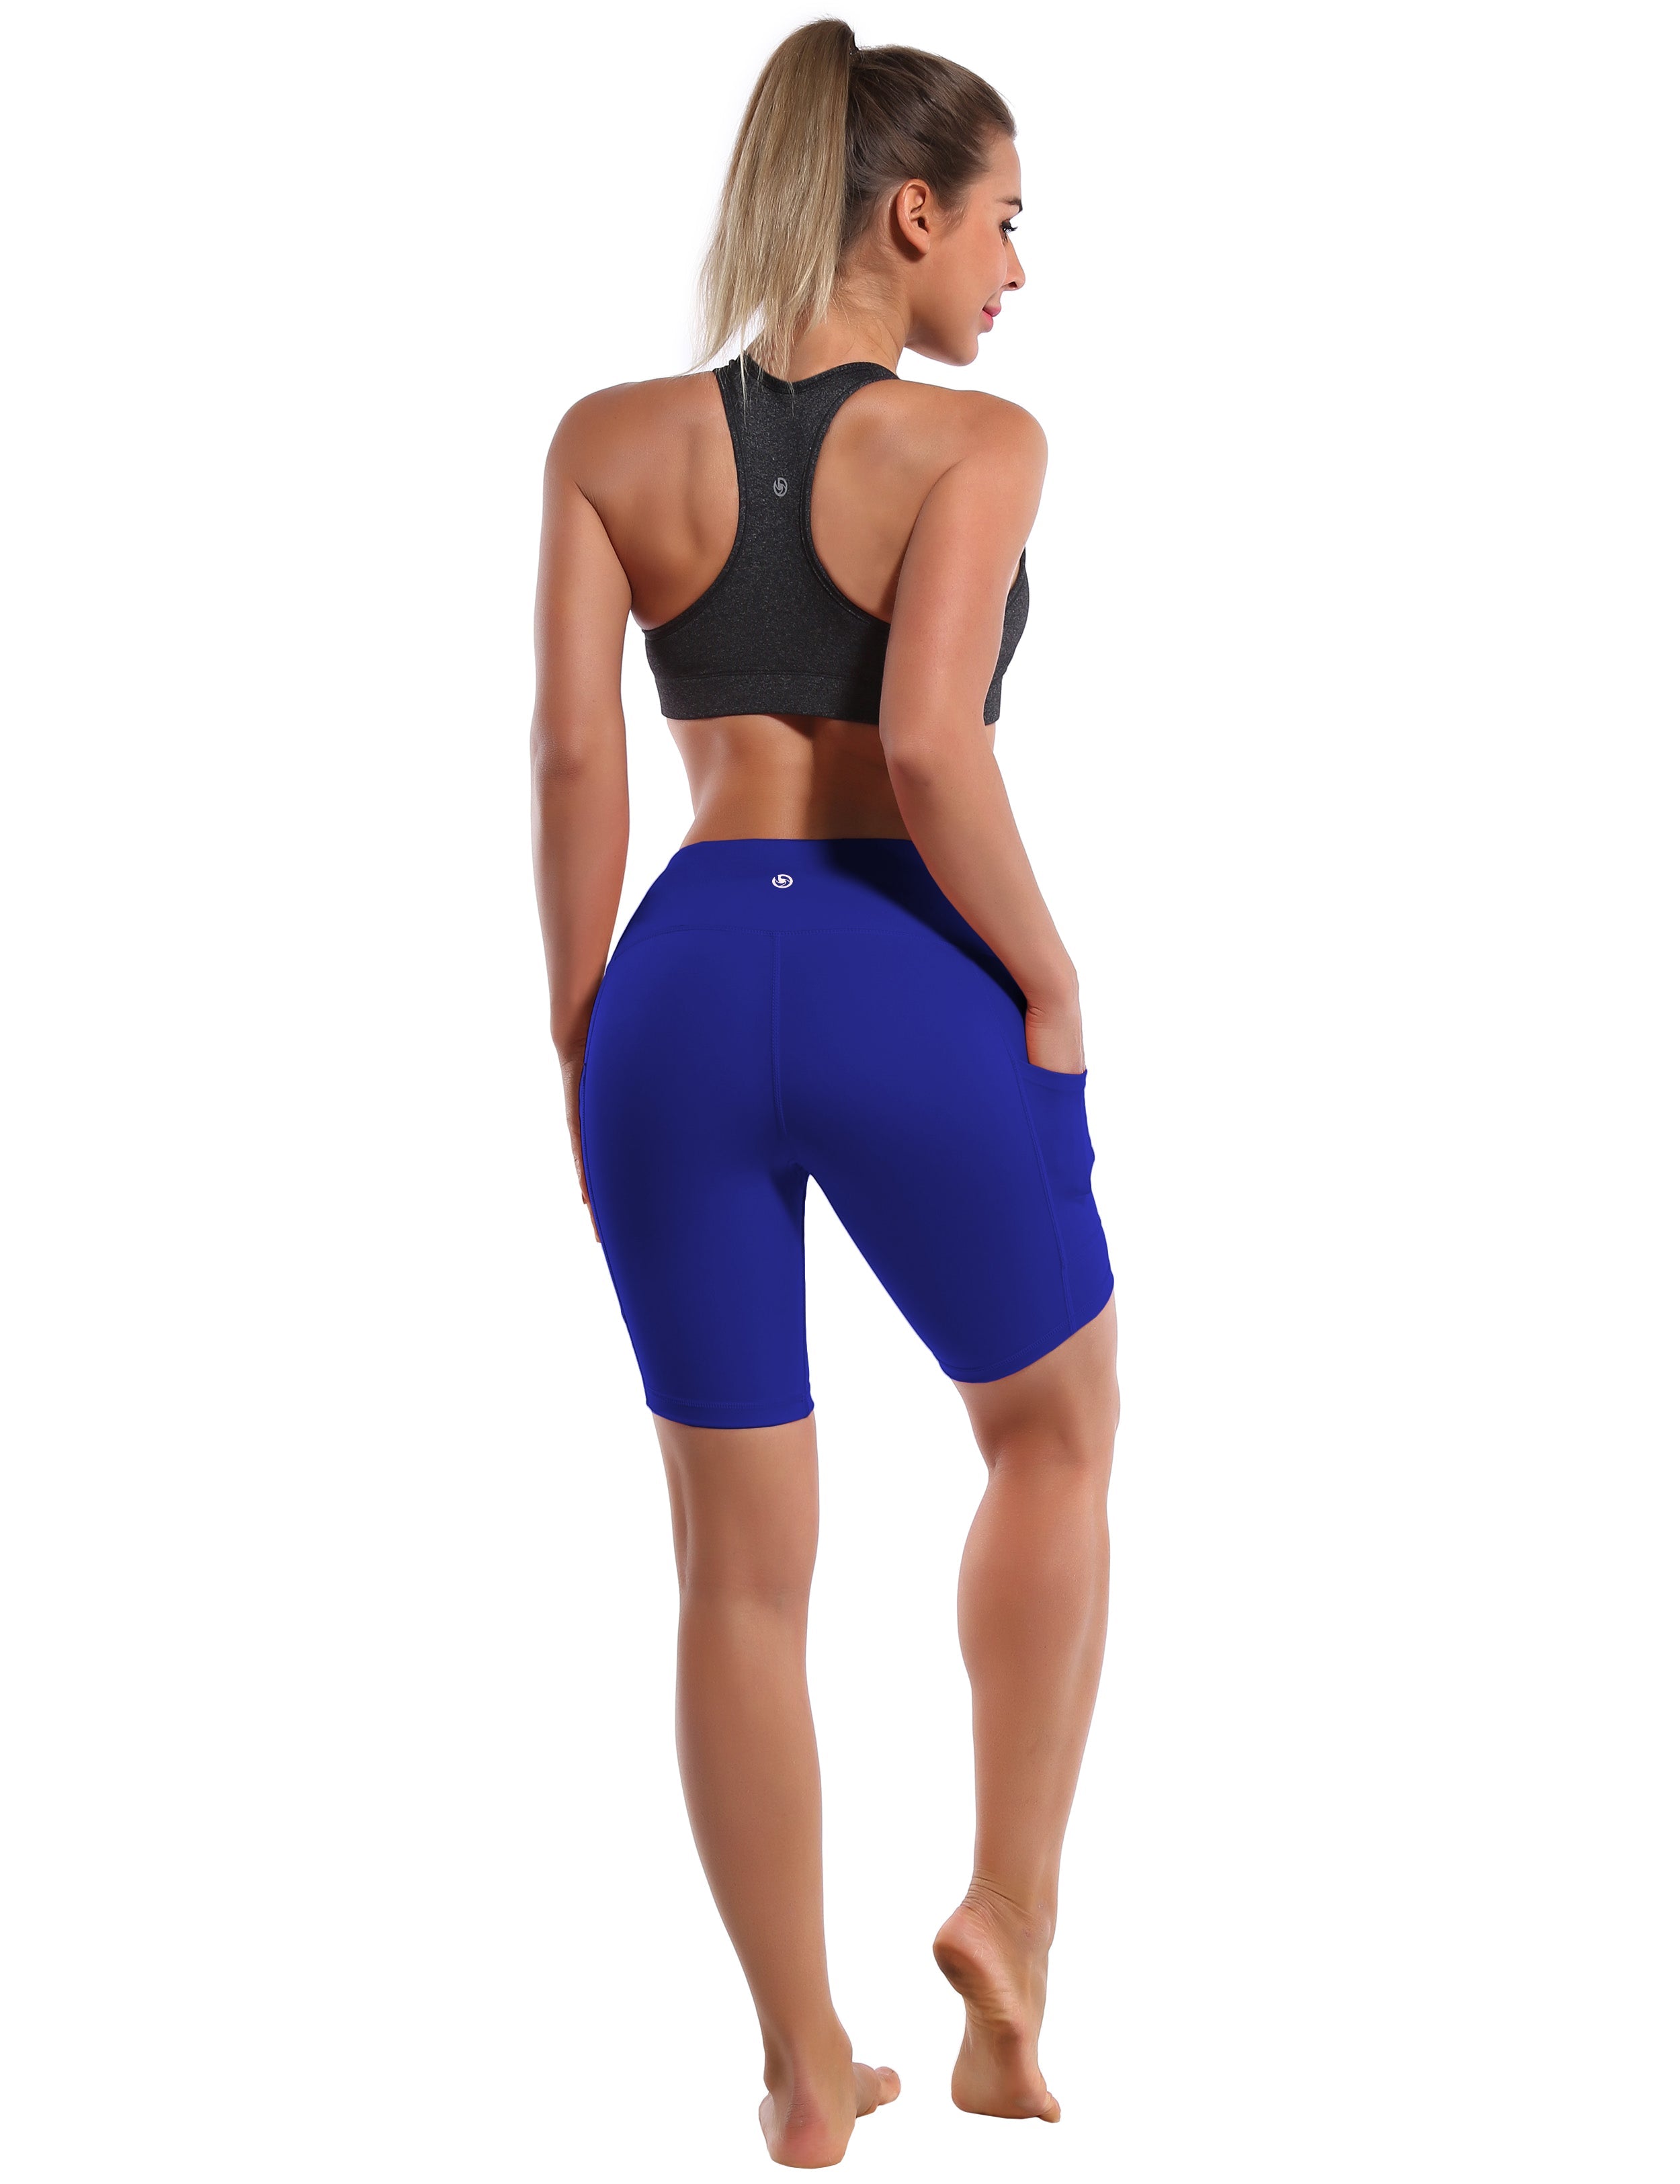 8" Side Pockets Golf Shorts navy Sleek, soft, smooth and totally comfortable: our newest style is here. Softest-ever fabric High elasticity High density 4-way stretch Fabric doesn't attract lint easily No see-through Moisture-wicking Machine wash 75% Nylon, 25% Spandex